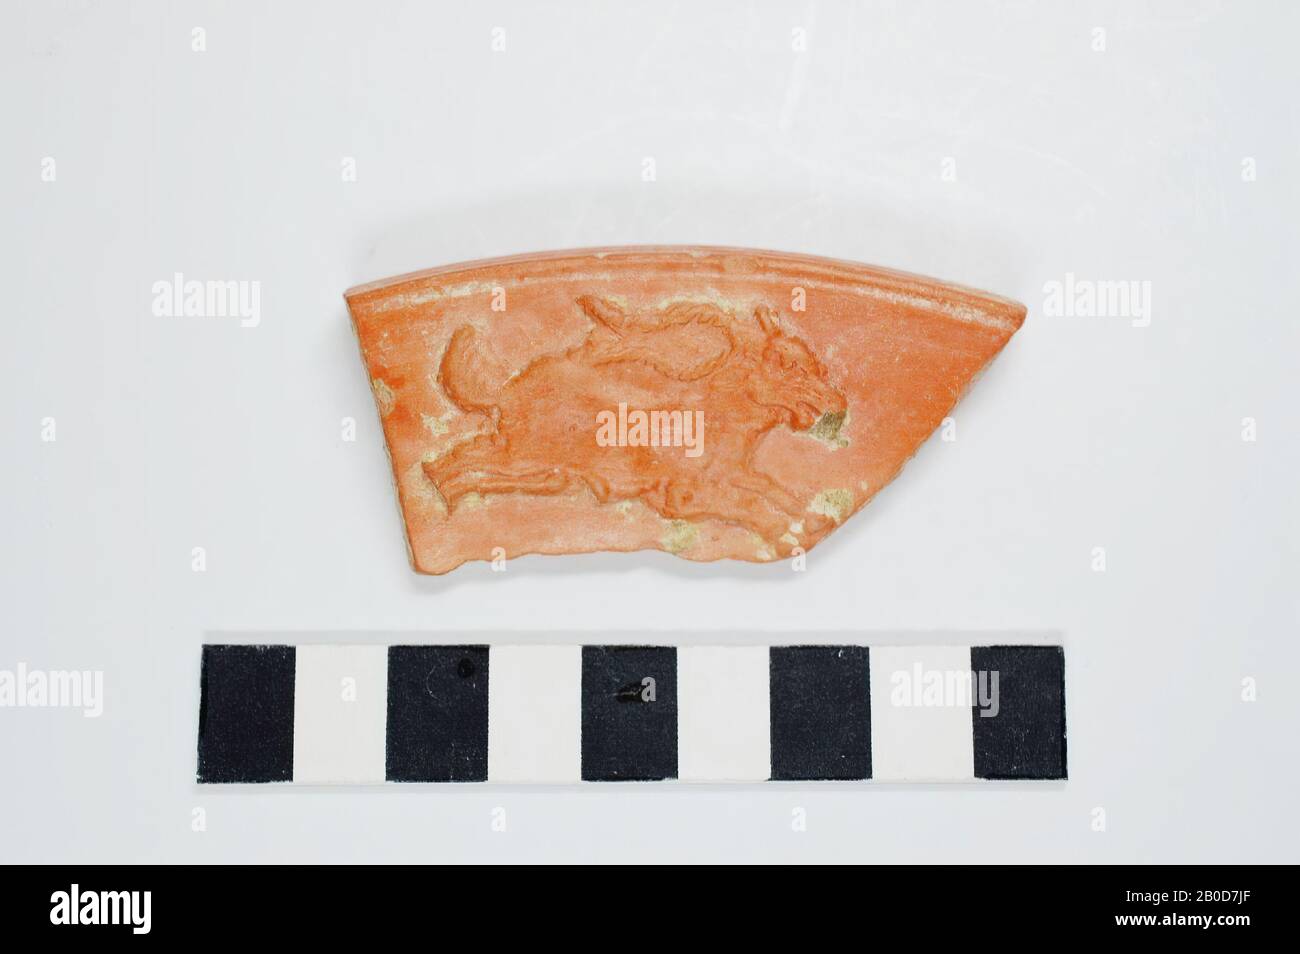 Fragment of a large scale of North African terra sigillata, with the typical orange-red silt layer. The edge of the shell was decorated with running animals (and possibly hunters), one of which has been preserved: a running antelope (or ibex) to the right, the front and hind legs stretched. The animal has beautiful, curled horns, and a thick upward directed tail. The intense look and the open mouth give an impression of great vibrancy. Provided with a label: 'Roman North Africa. Redware sherd showing an ibex or similar antelope leaping right. 1st-2nd C. Tunisia. ', Terra sigillata (fragment Stock Photo